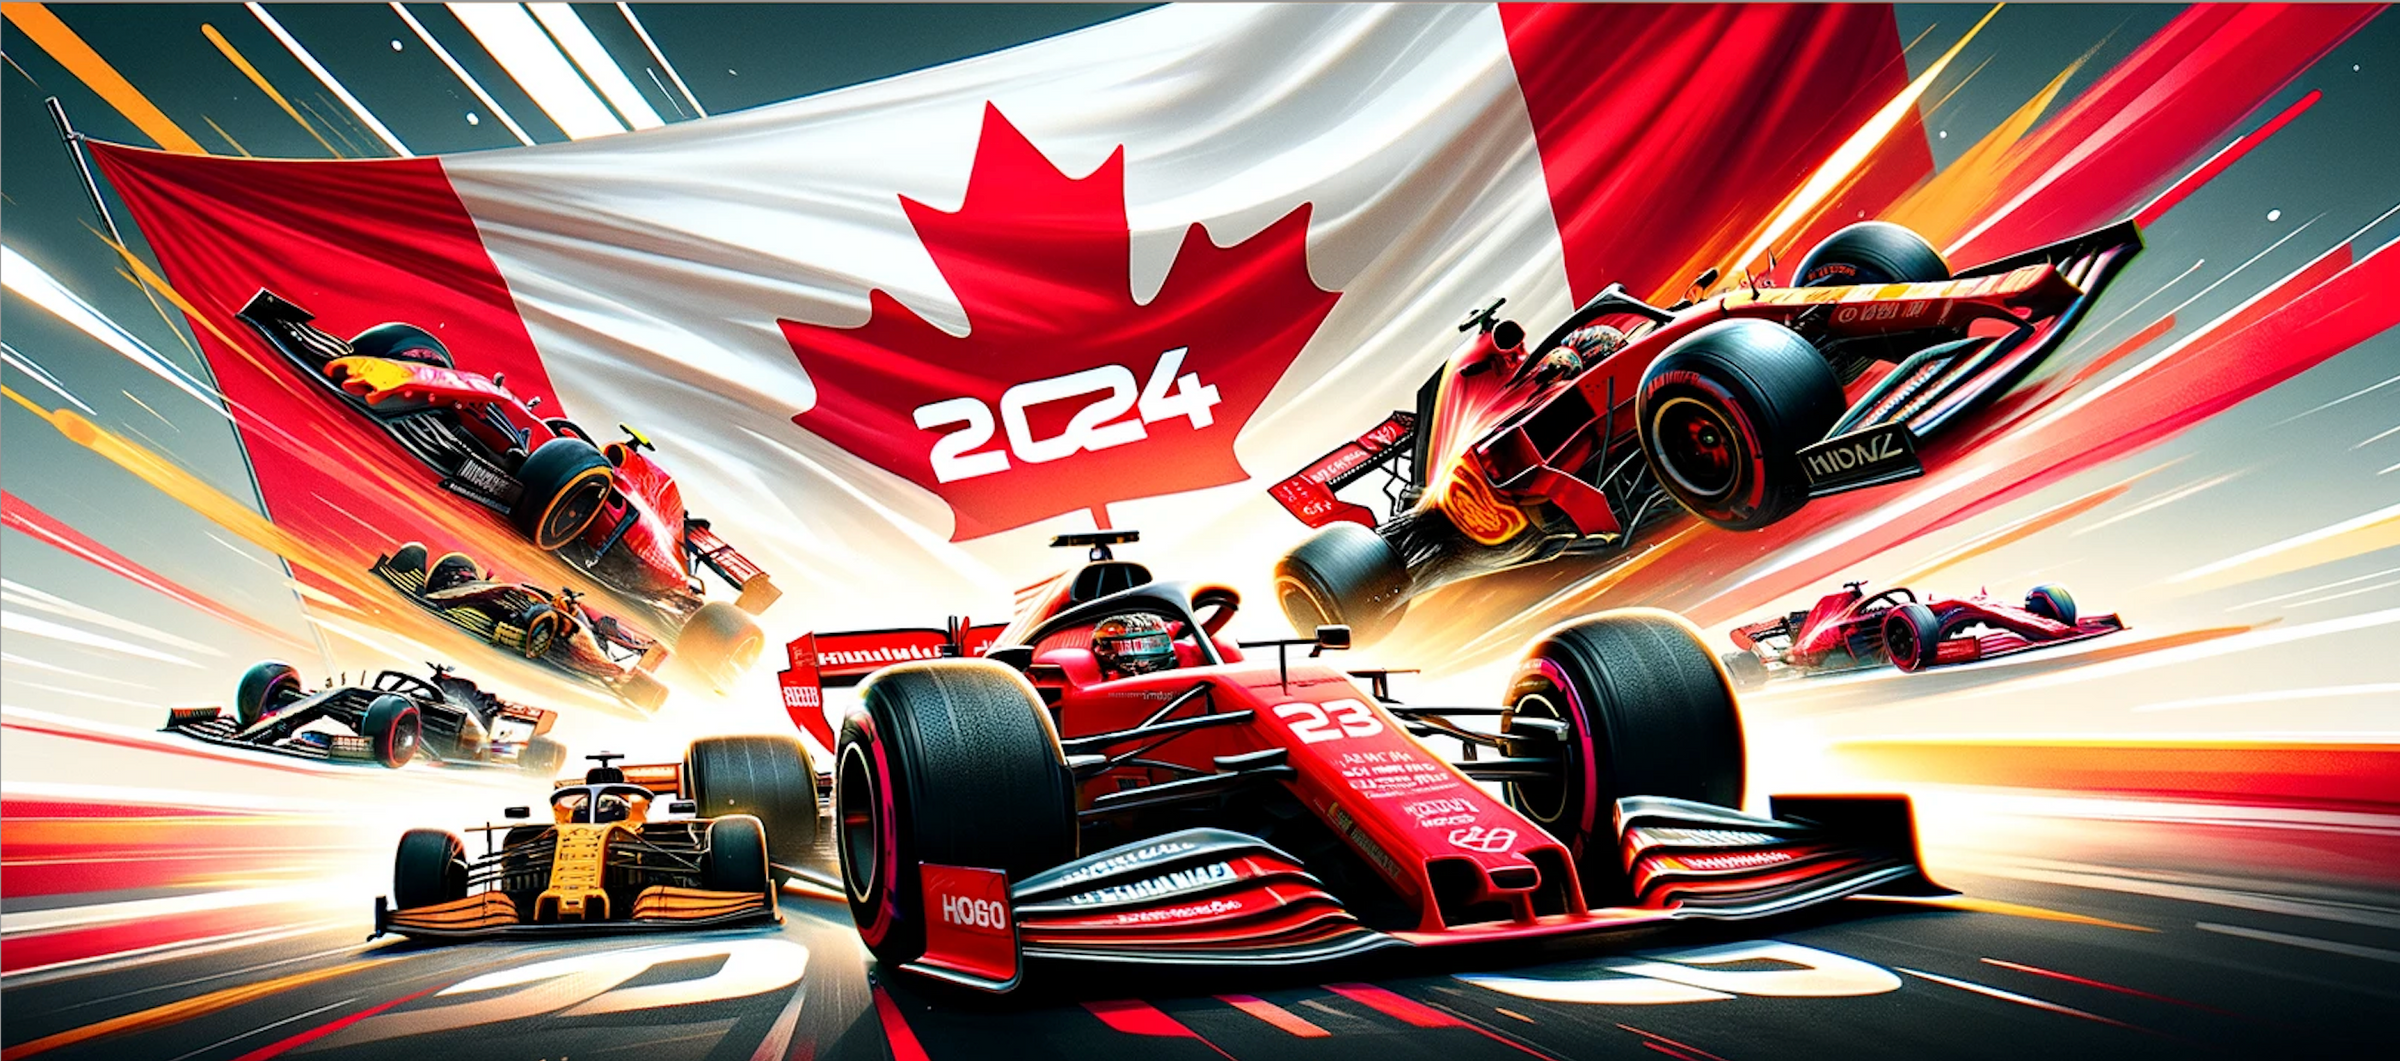 Official Formula 1™ Team and Driver Merchandise from Scuderia Ferrari, Red Bull Racing, Aston Martin, Williams, Haas, Mercedes AMG F1™ Store in Montréal Québec Canada 